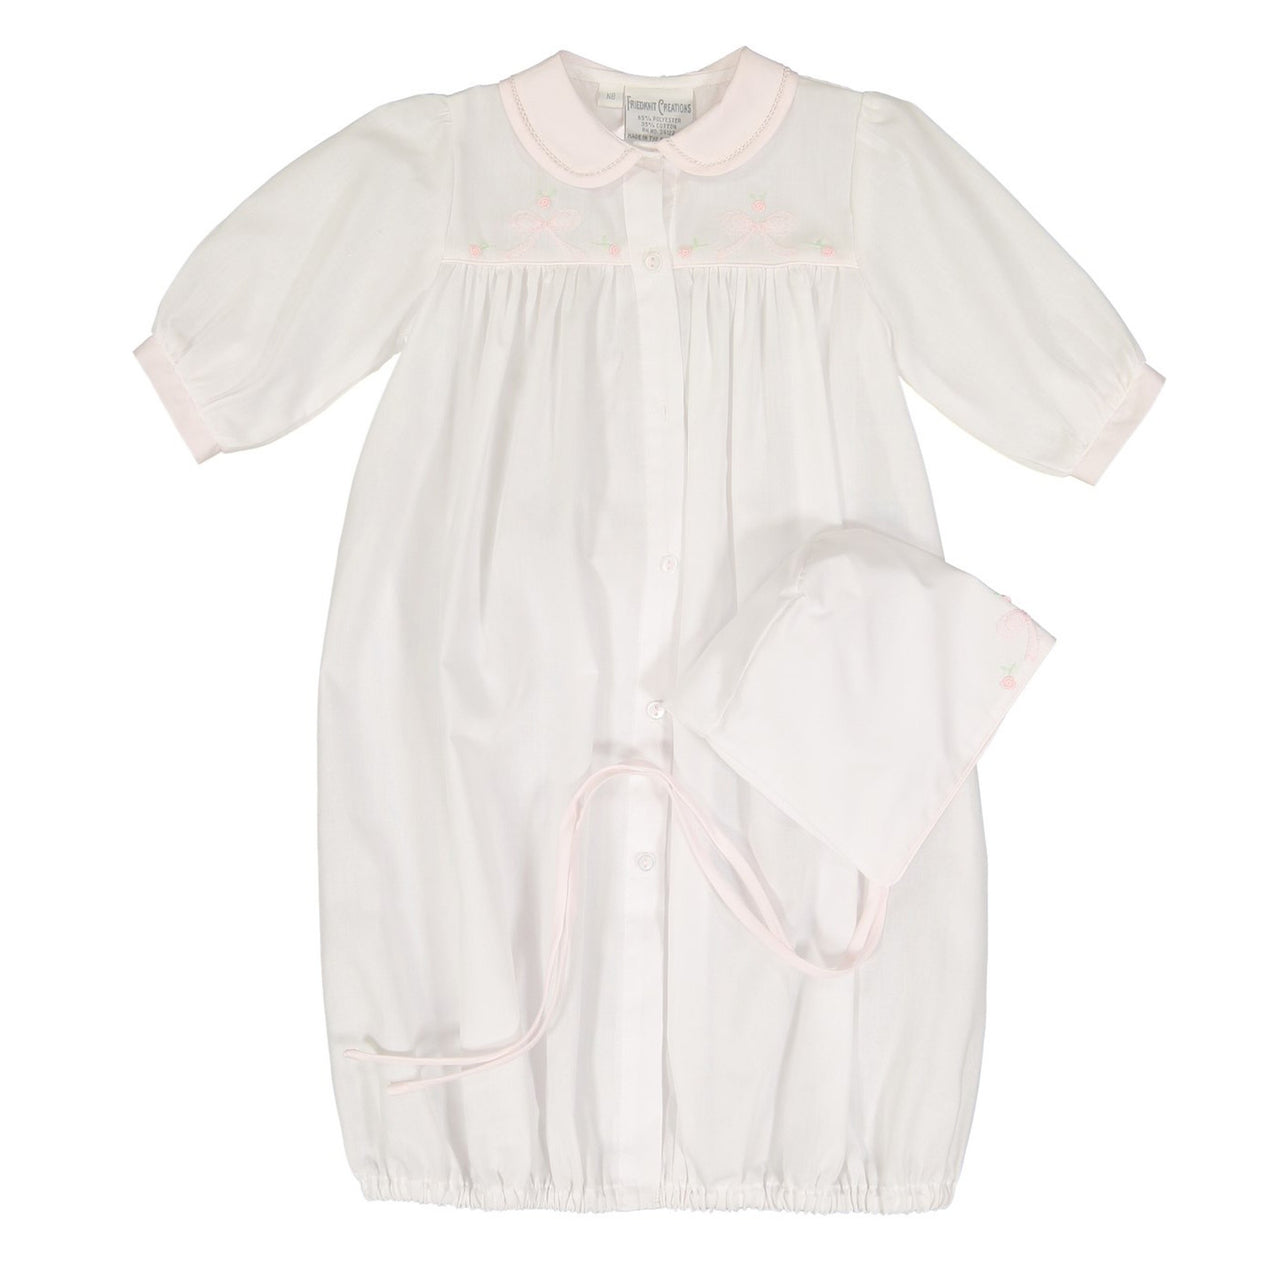 Feltman Preemie Embroidered Bow Take Me Home Gown & Hat Set P1153 5009